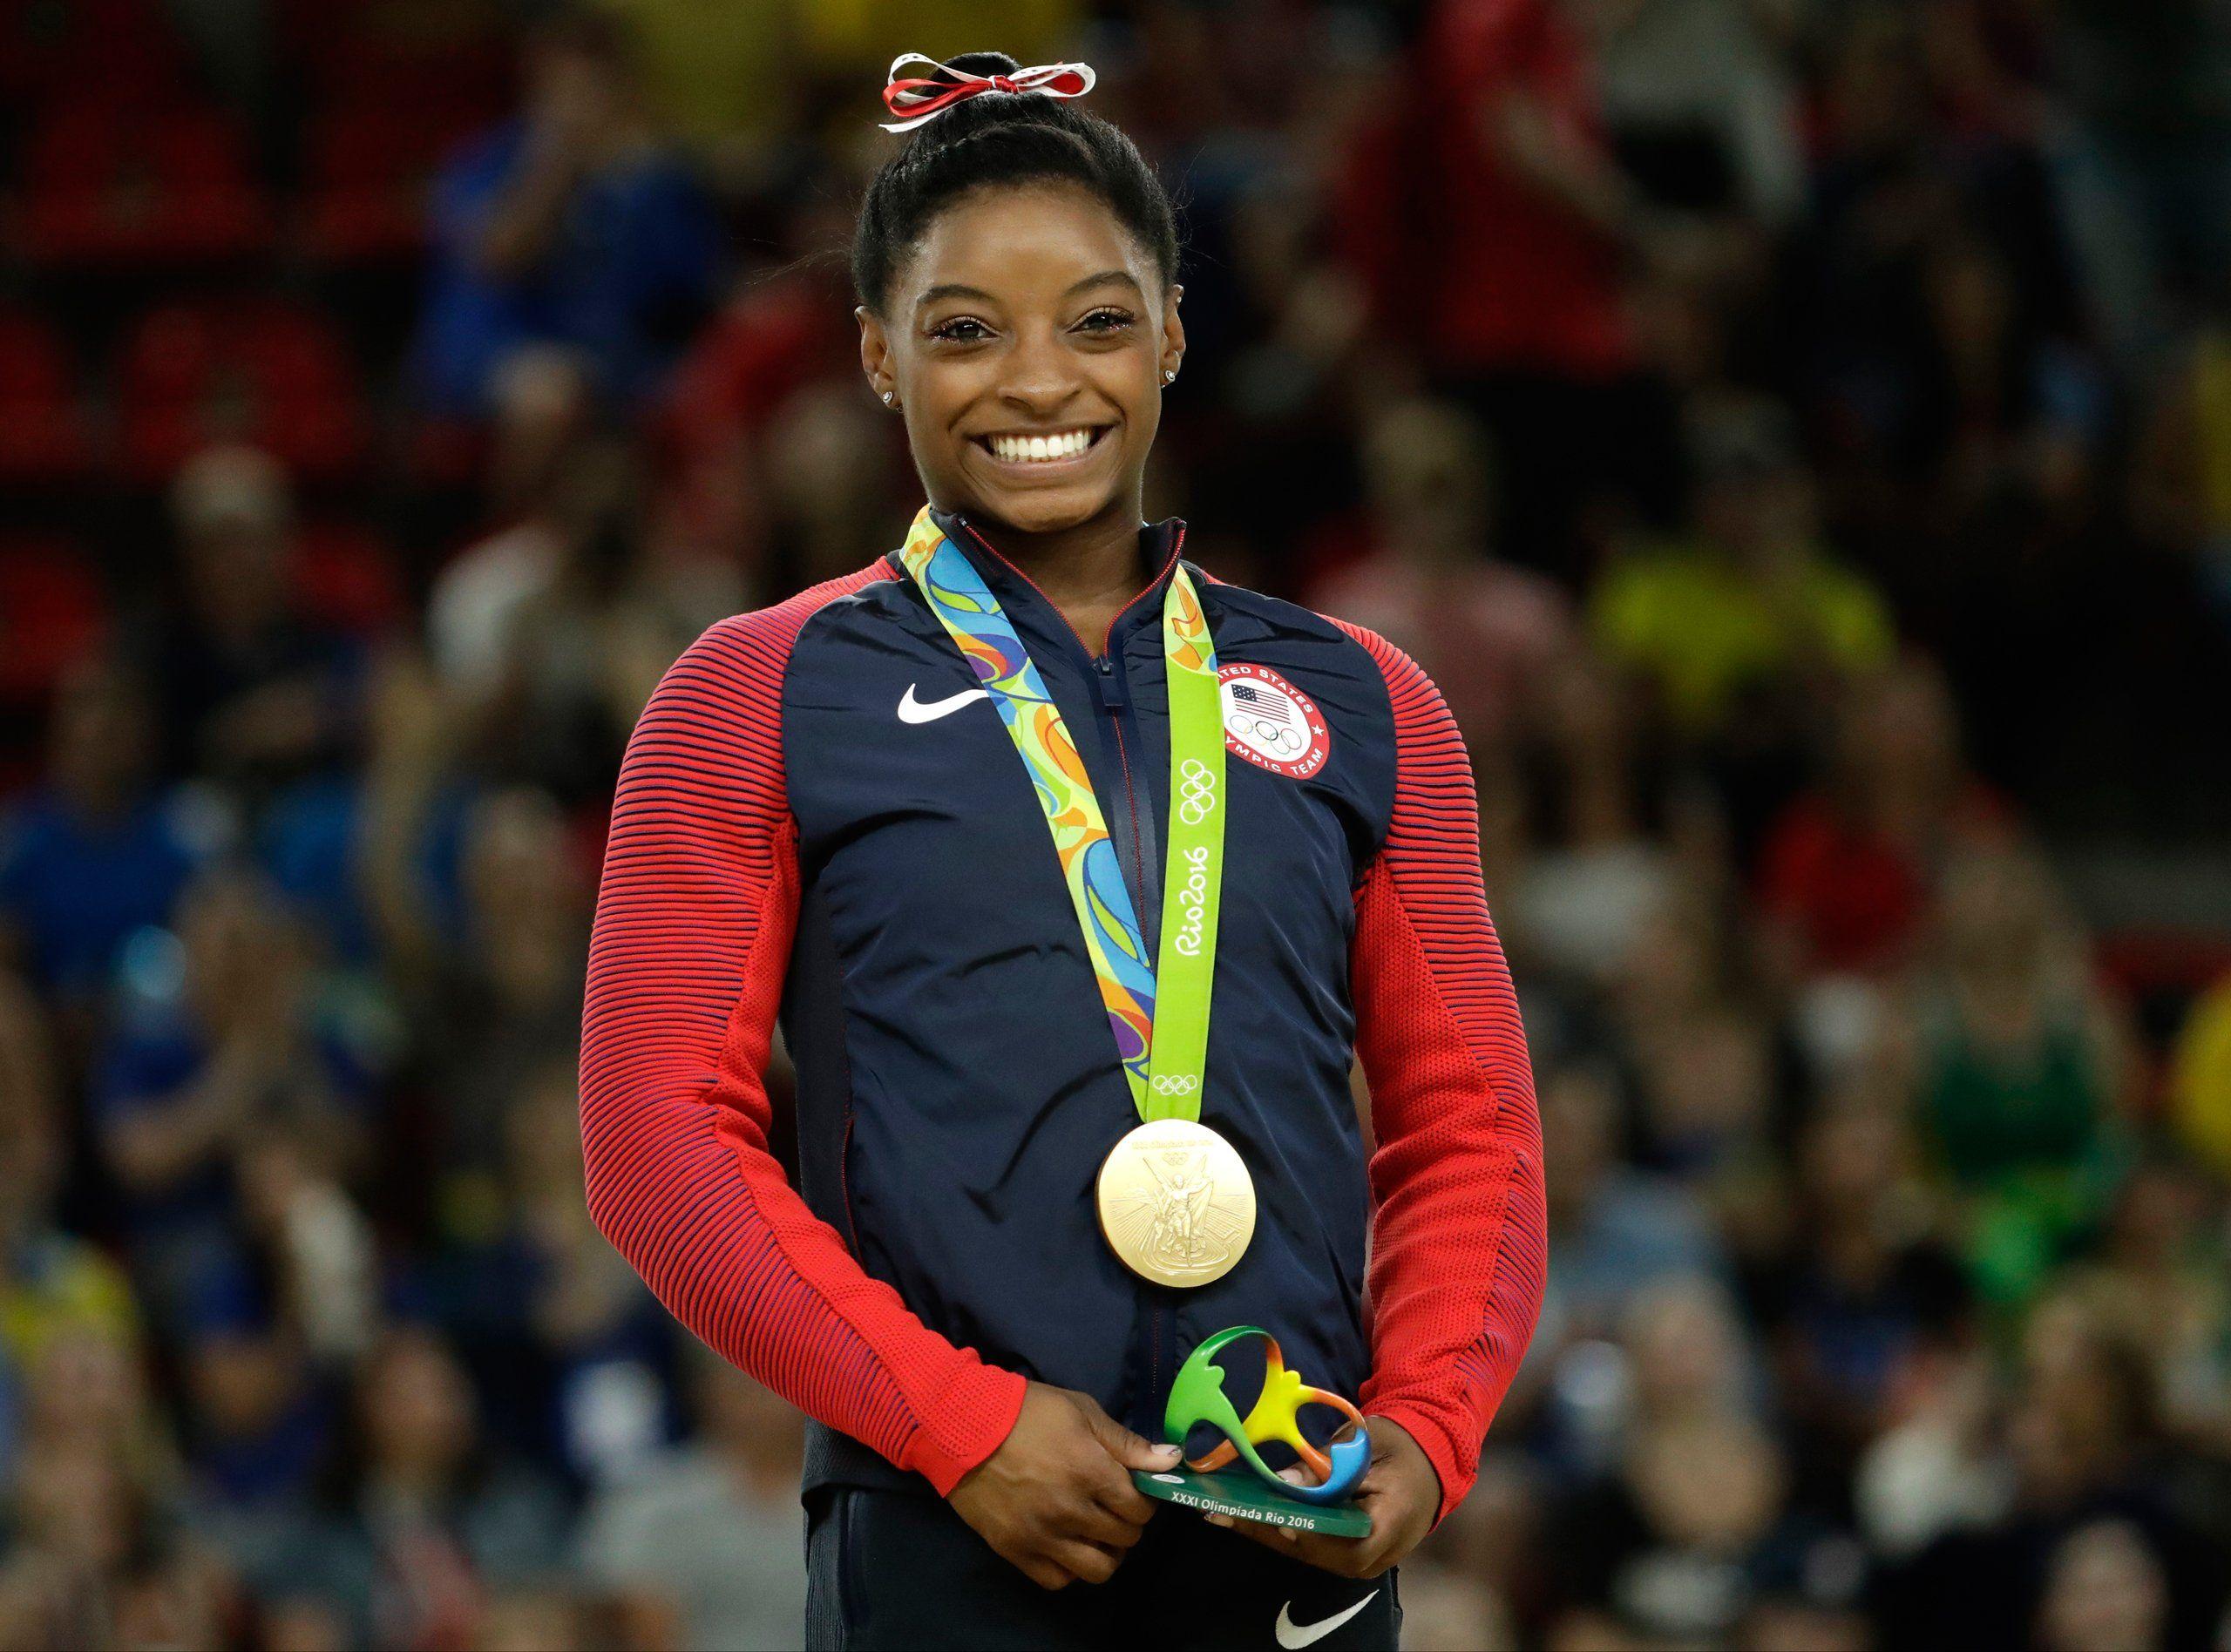 Simone Biles Image. Picture, Photo, Wallpaper and Background